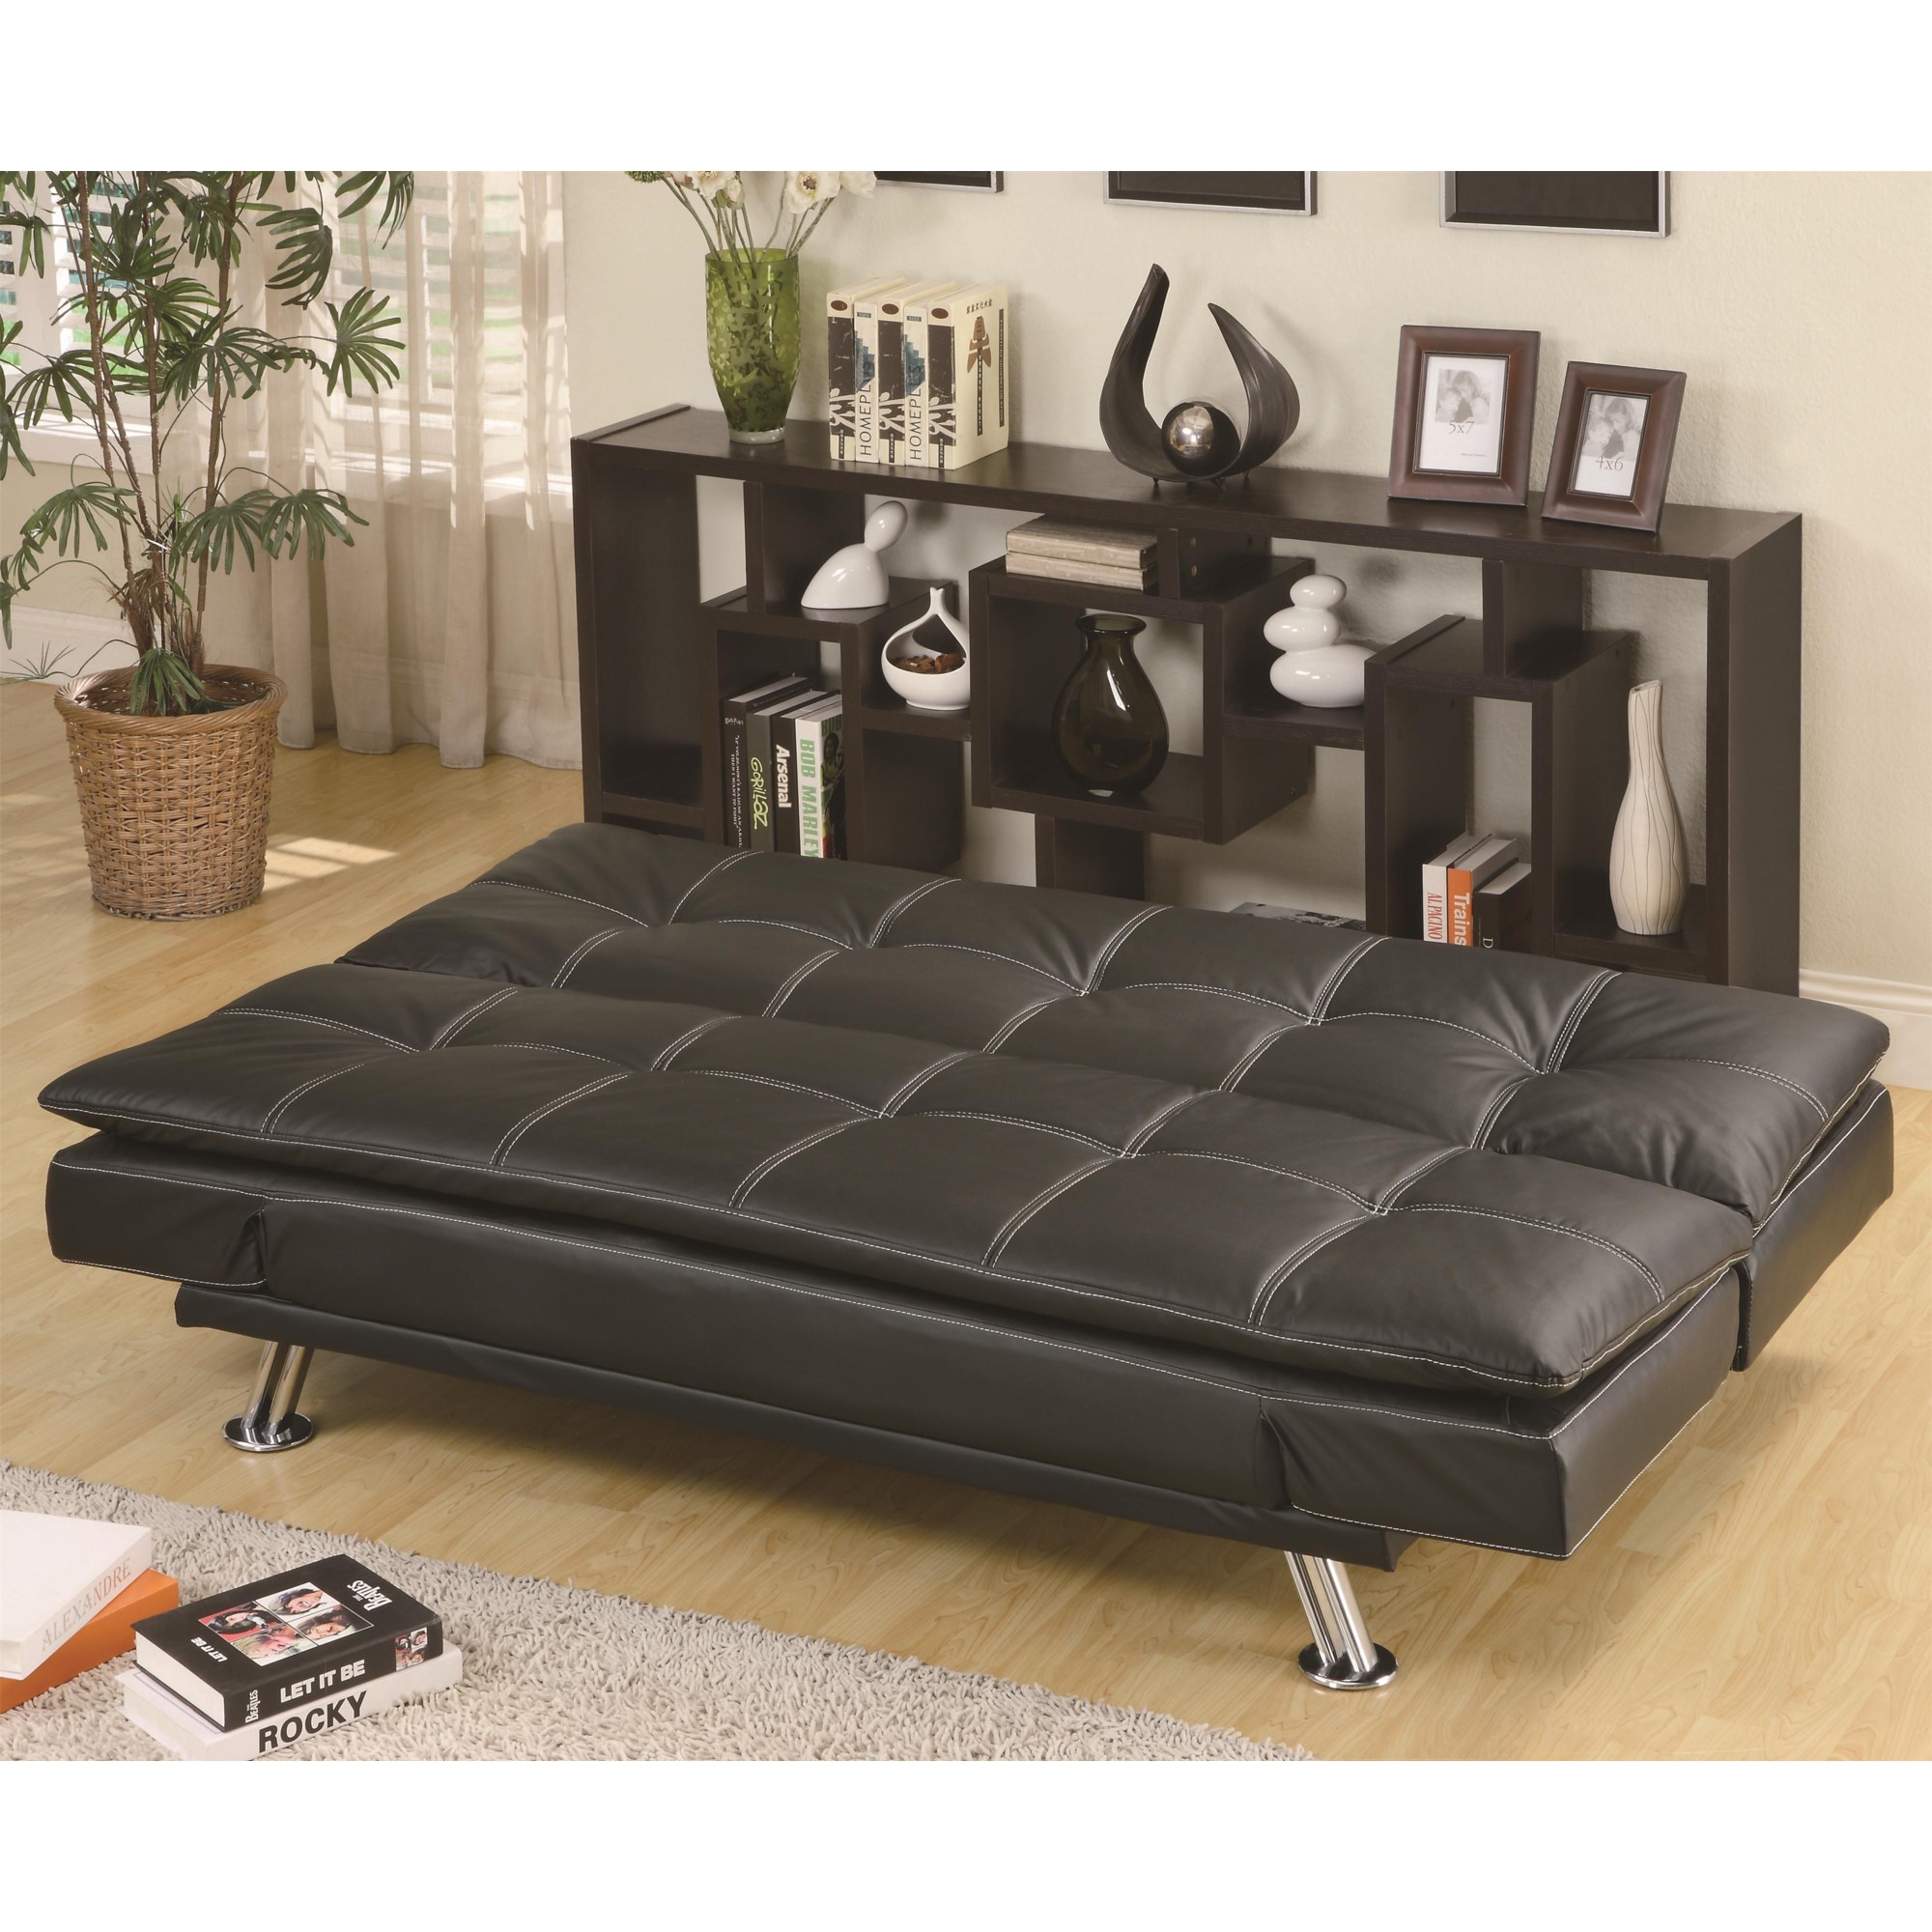 Plush Sofa Bed Foot Stool - Complements Plush Sofa Beds